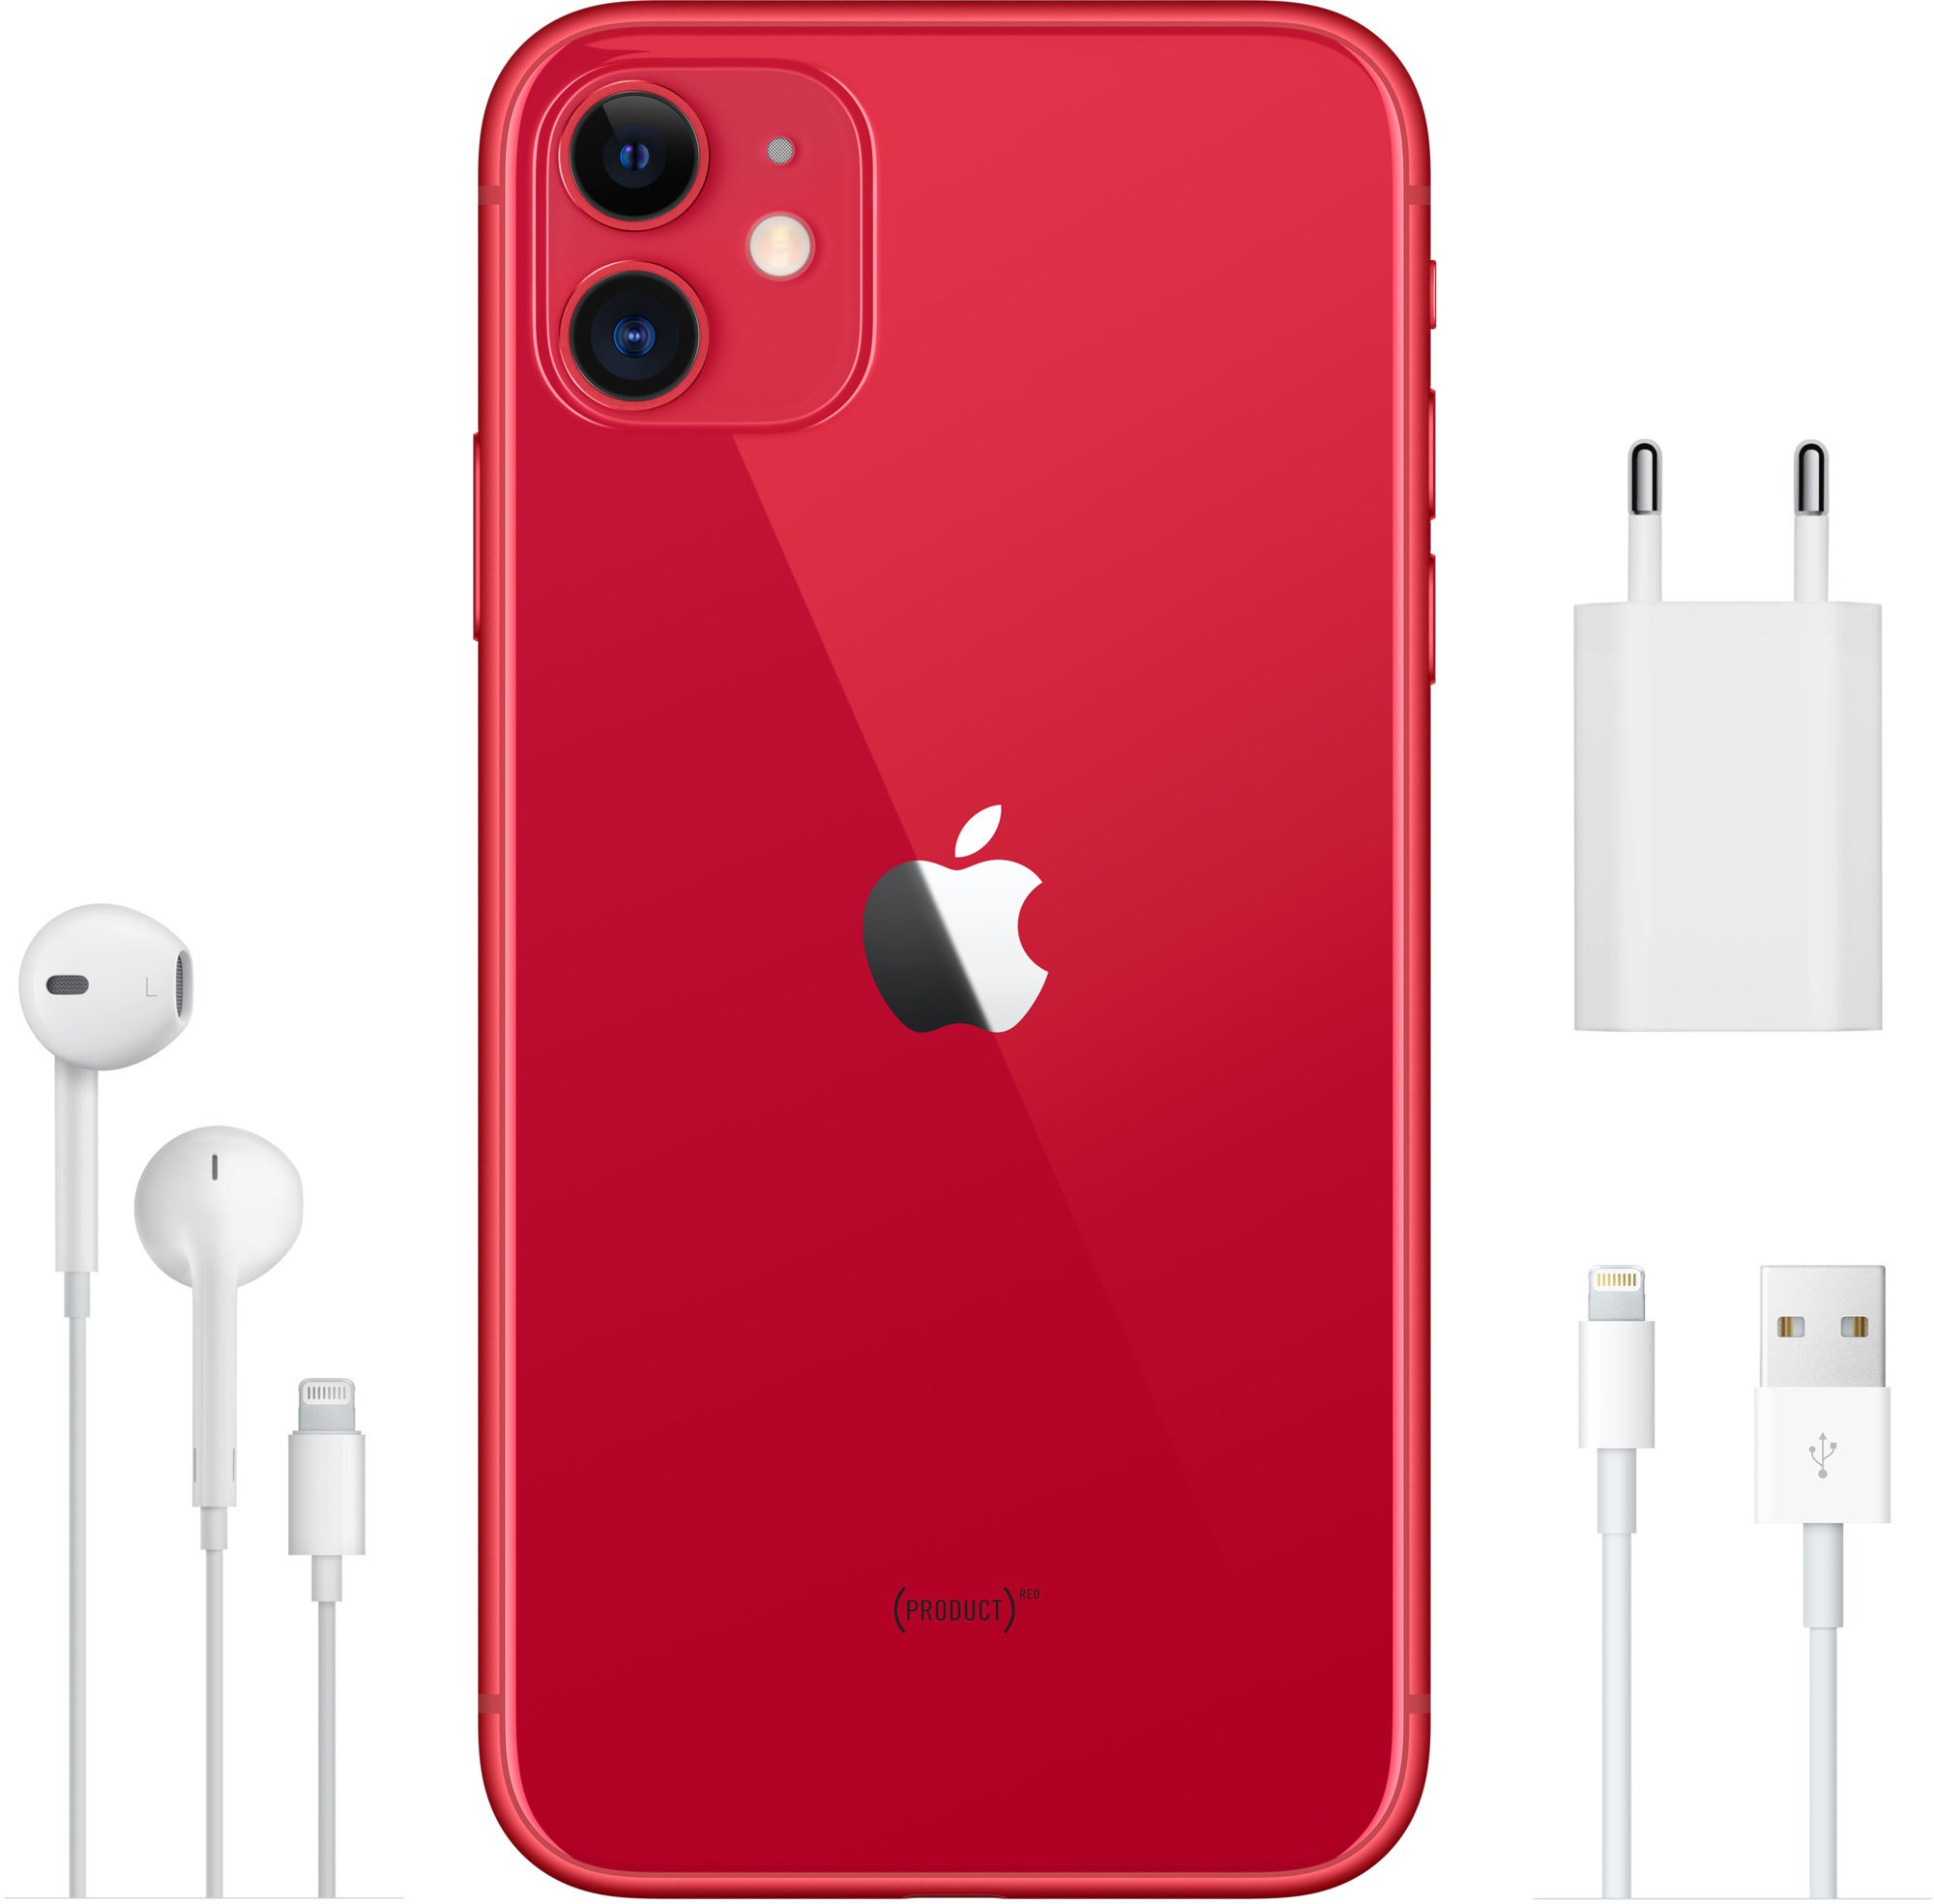 Apple iPhone 11 128GB (PRODUCT)RED | ExaSoft.cz